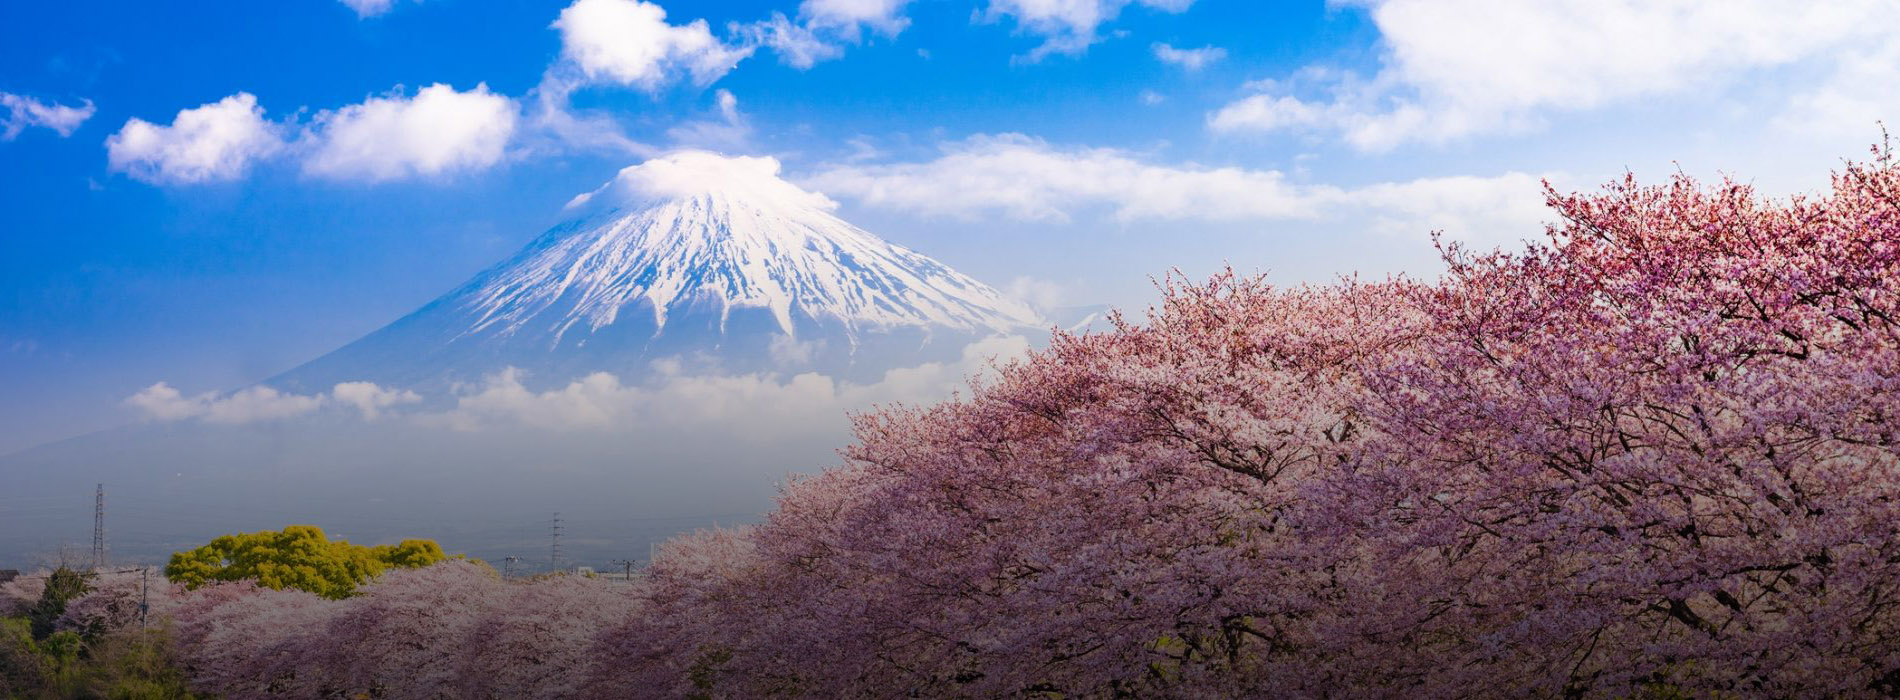 Best Tour Packages To Japan From Saudi Arabia, Asia Holiday Trips